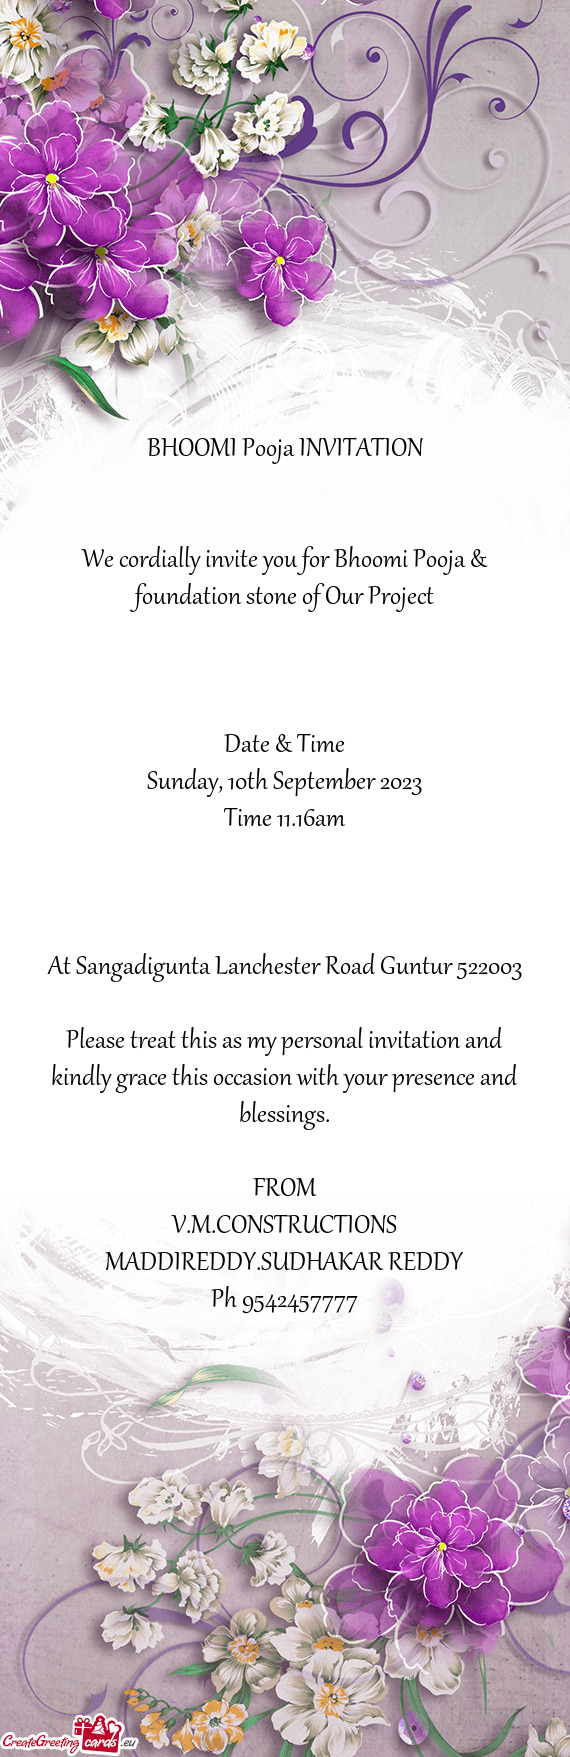 We cordially invite you for Bhoomi Pooja & foundation stone of Our Project